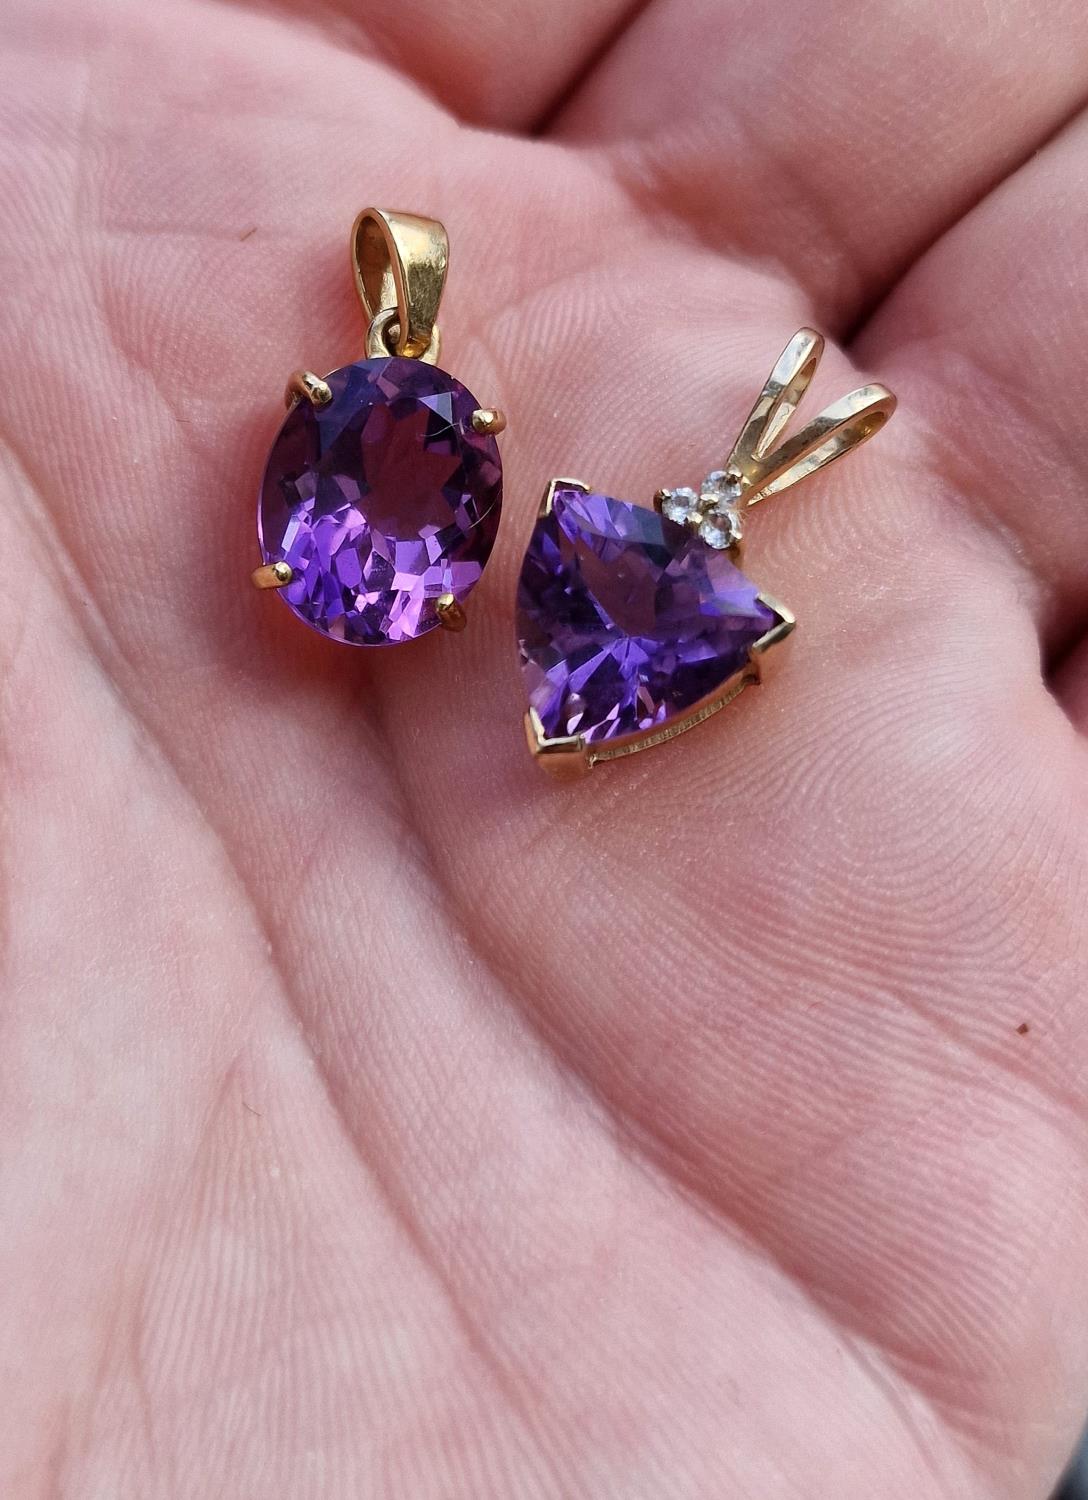 Pair of 9ct Gold and Amethyst Pendants (one with diamonds) - 4g - Image 2 of 2